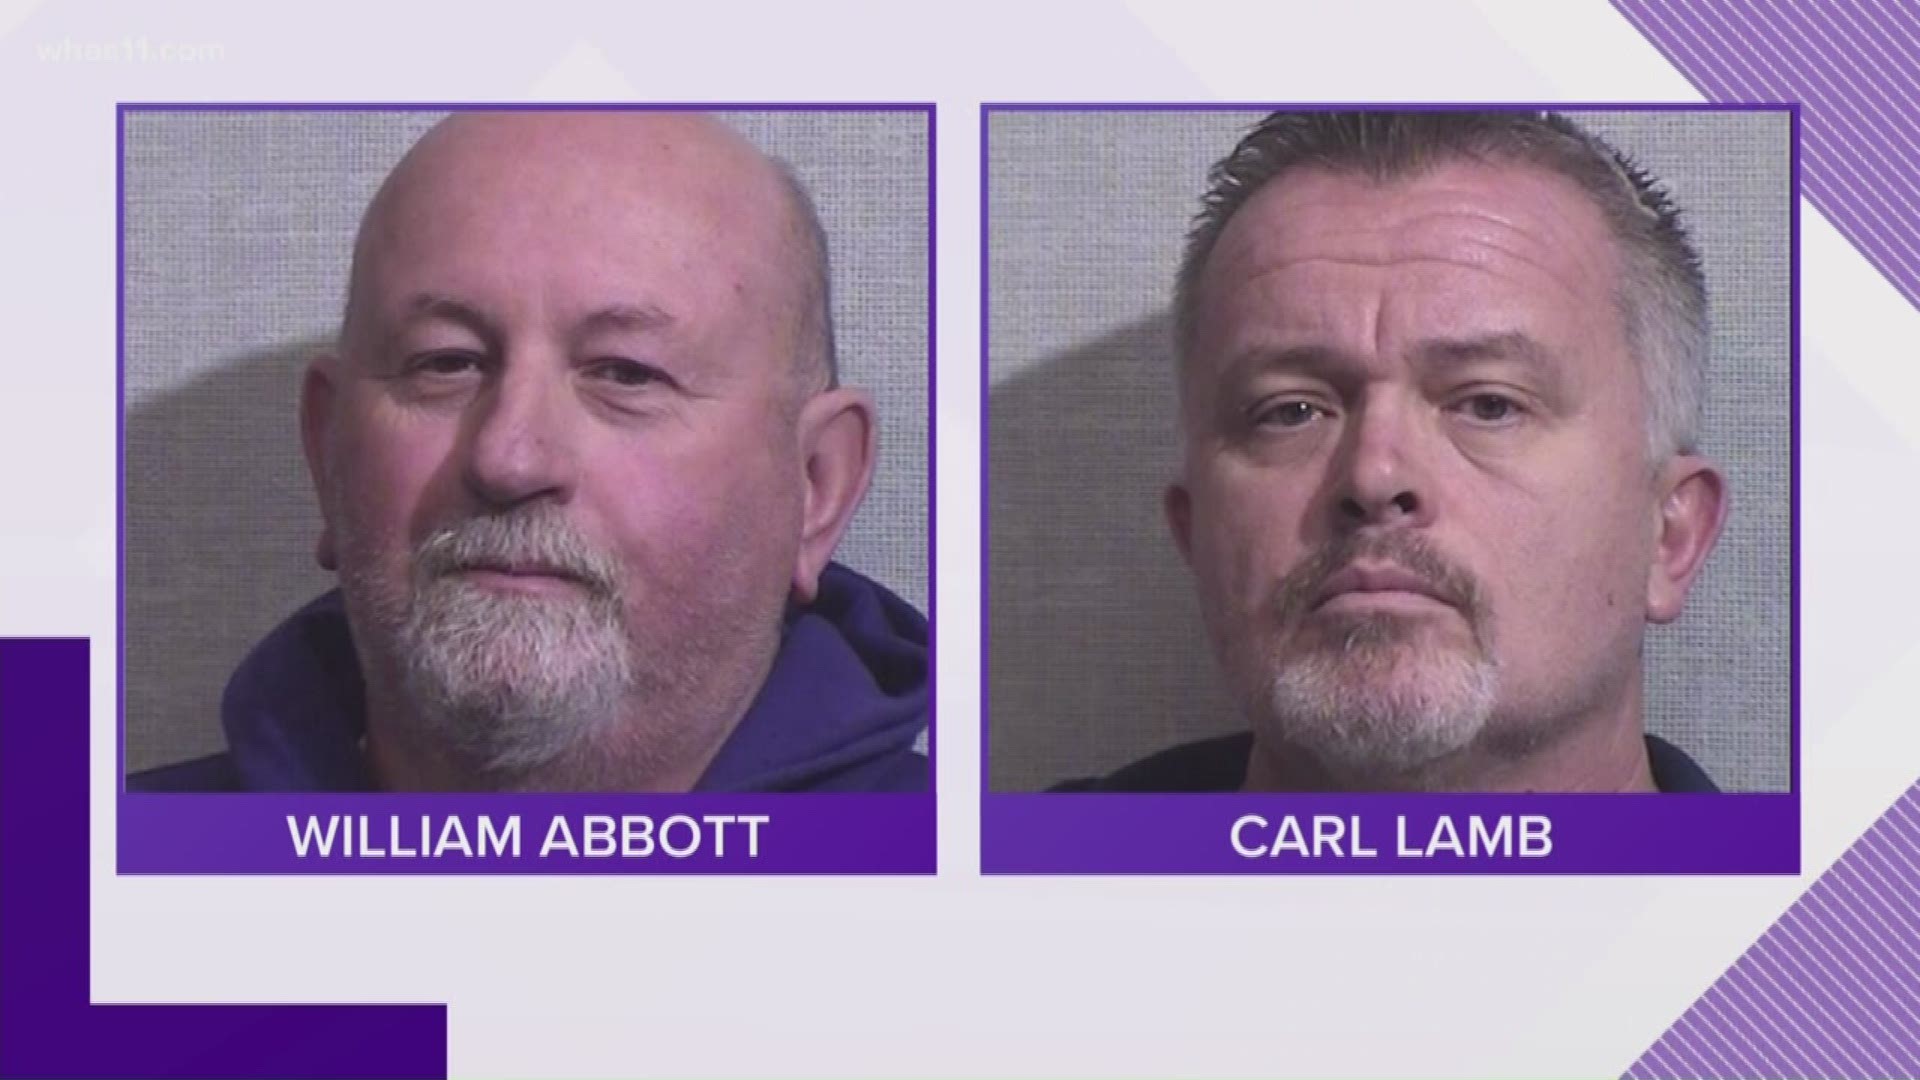 In a four-month investigation, detectives discovered former chief William Abbott and current captain carl lamb were both working security jobs during the same hours